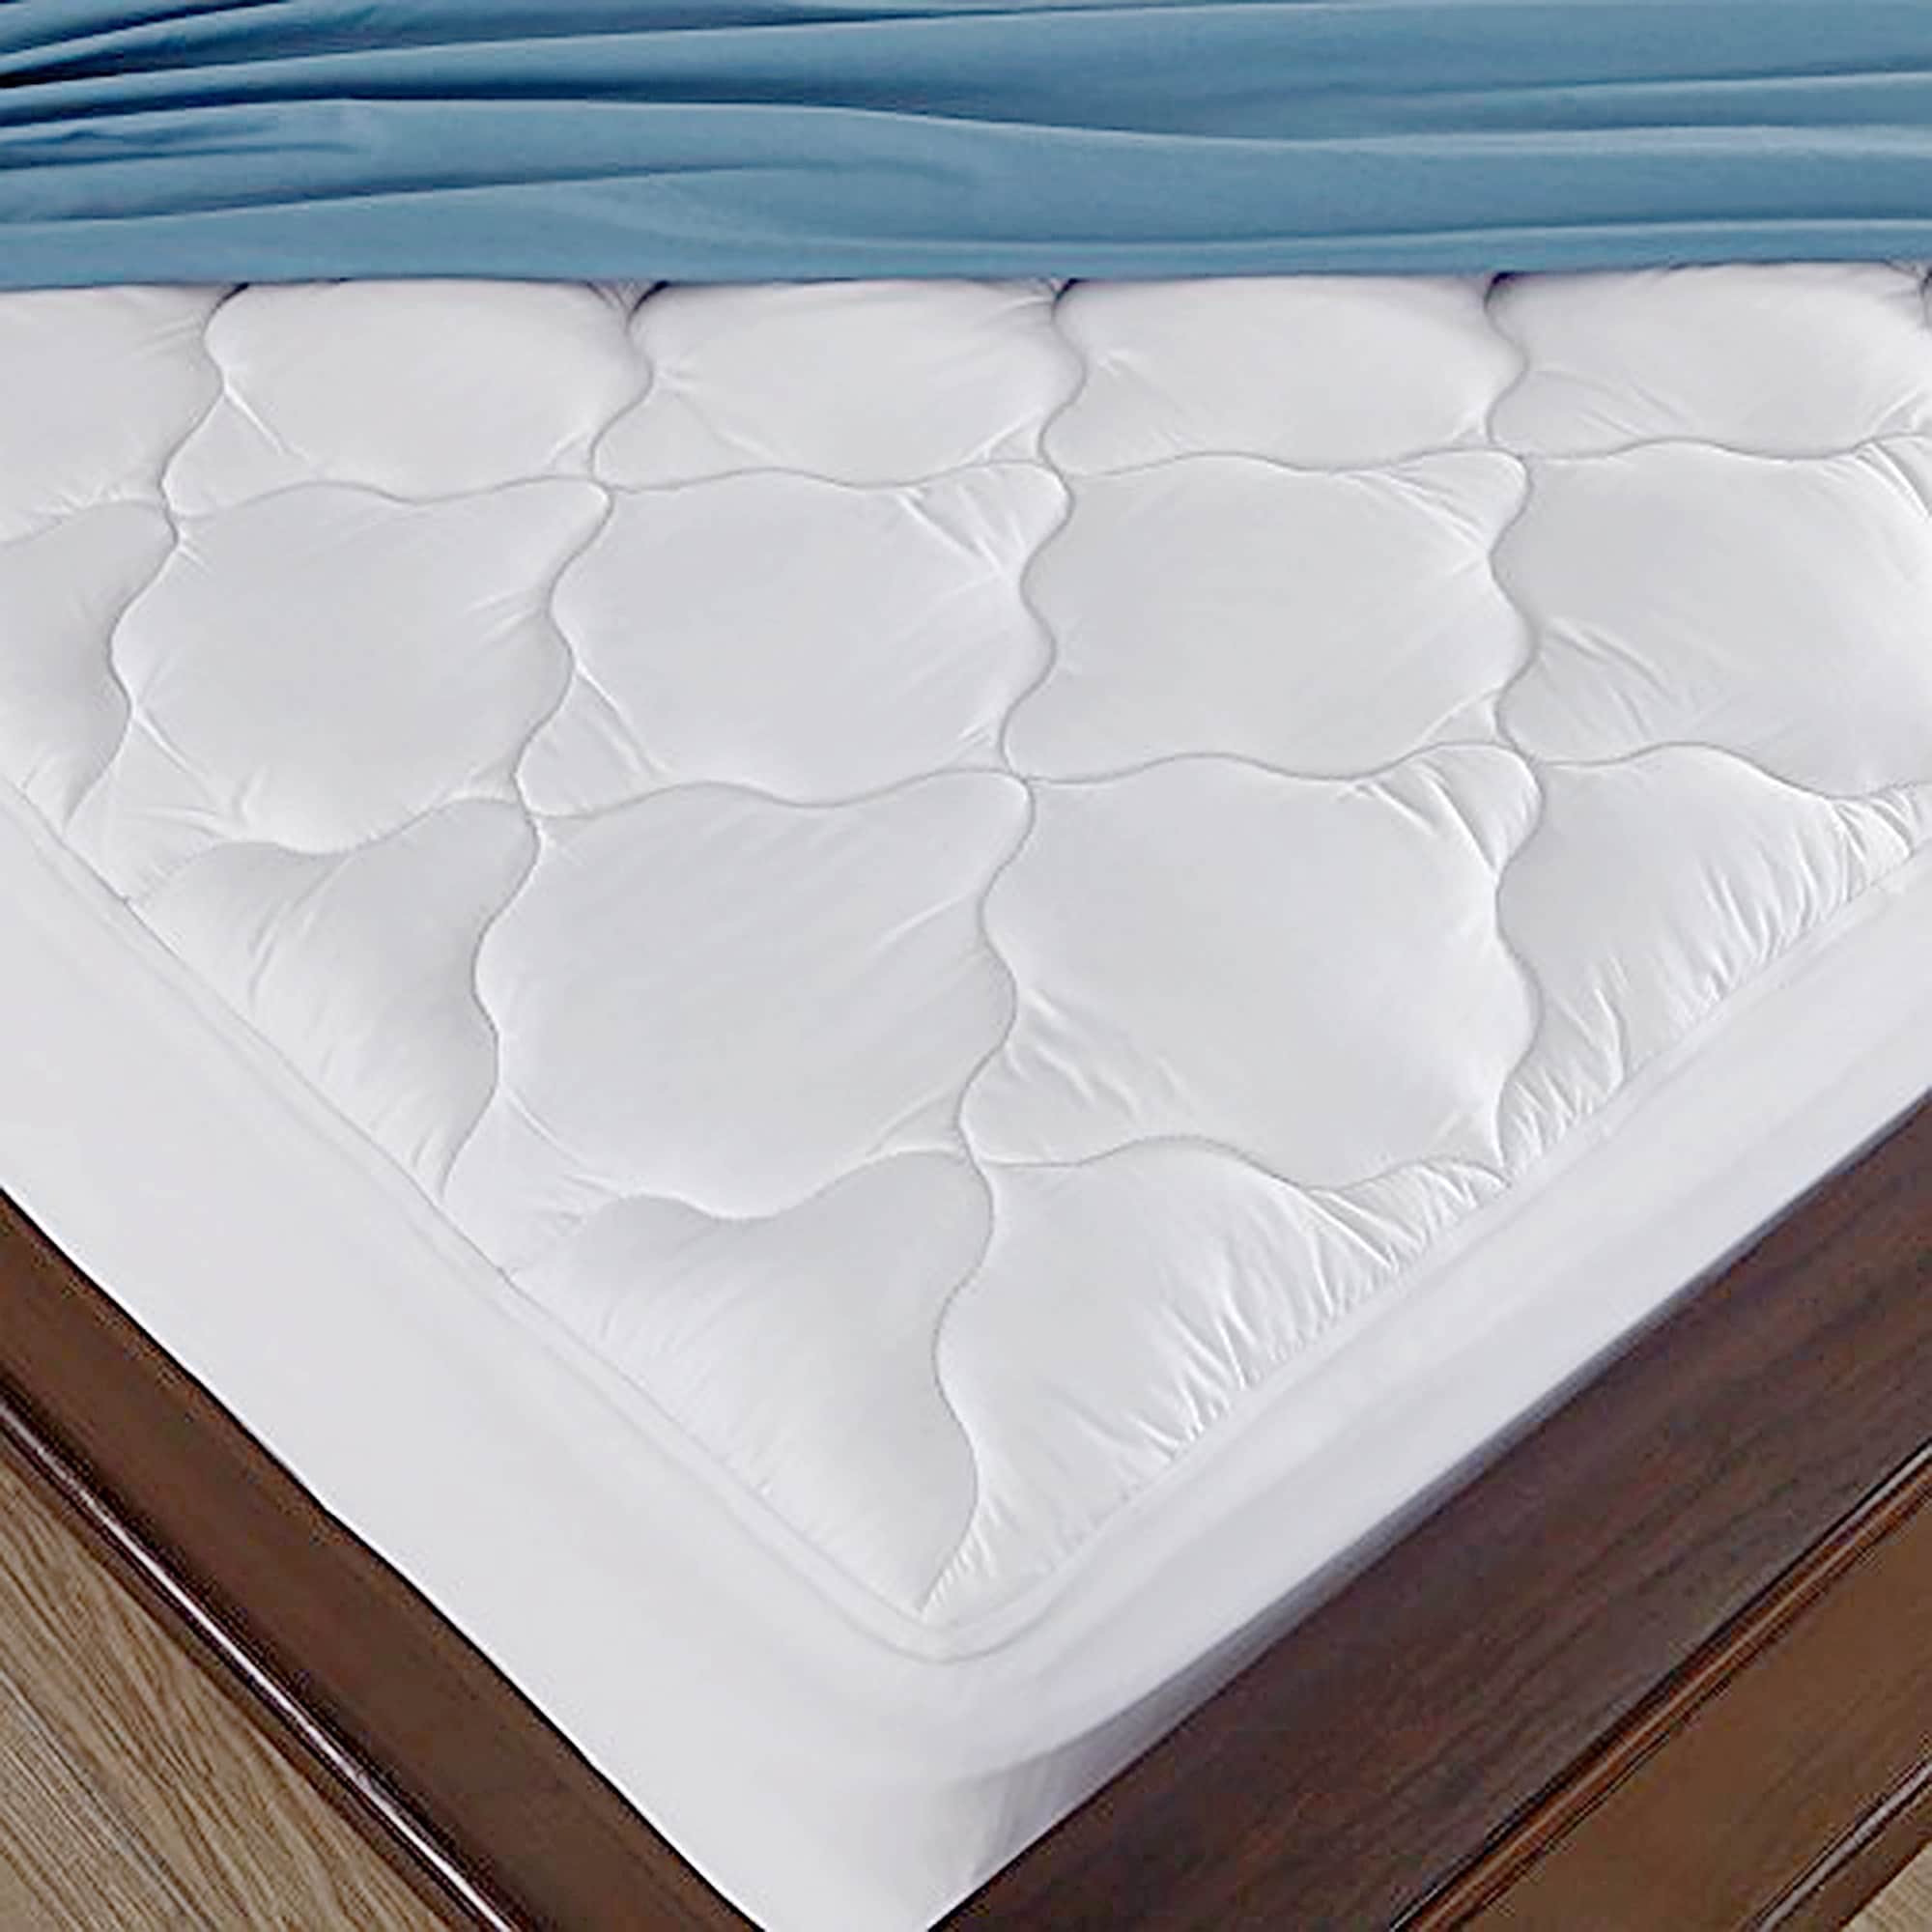 Bedmate Super Soft Cotton Touch Padded Mattress Cover, Queen, Fits 15  Inches Deep